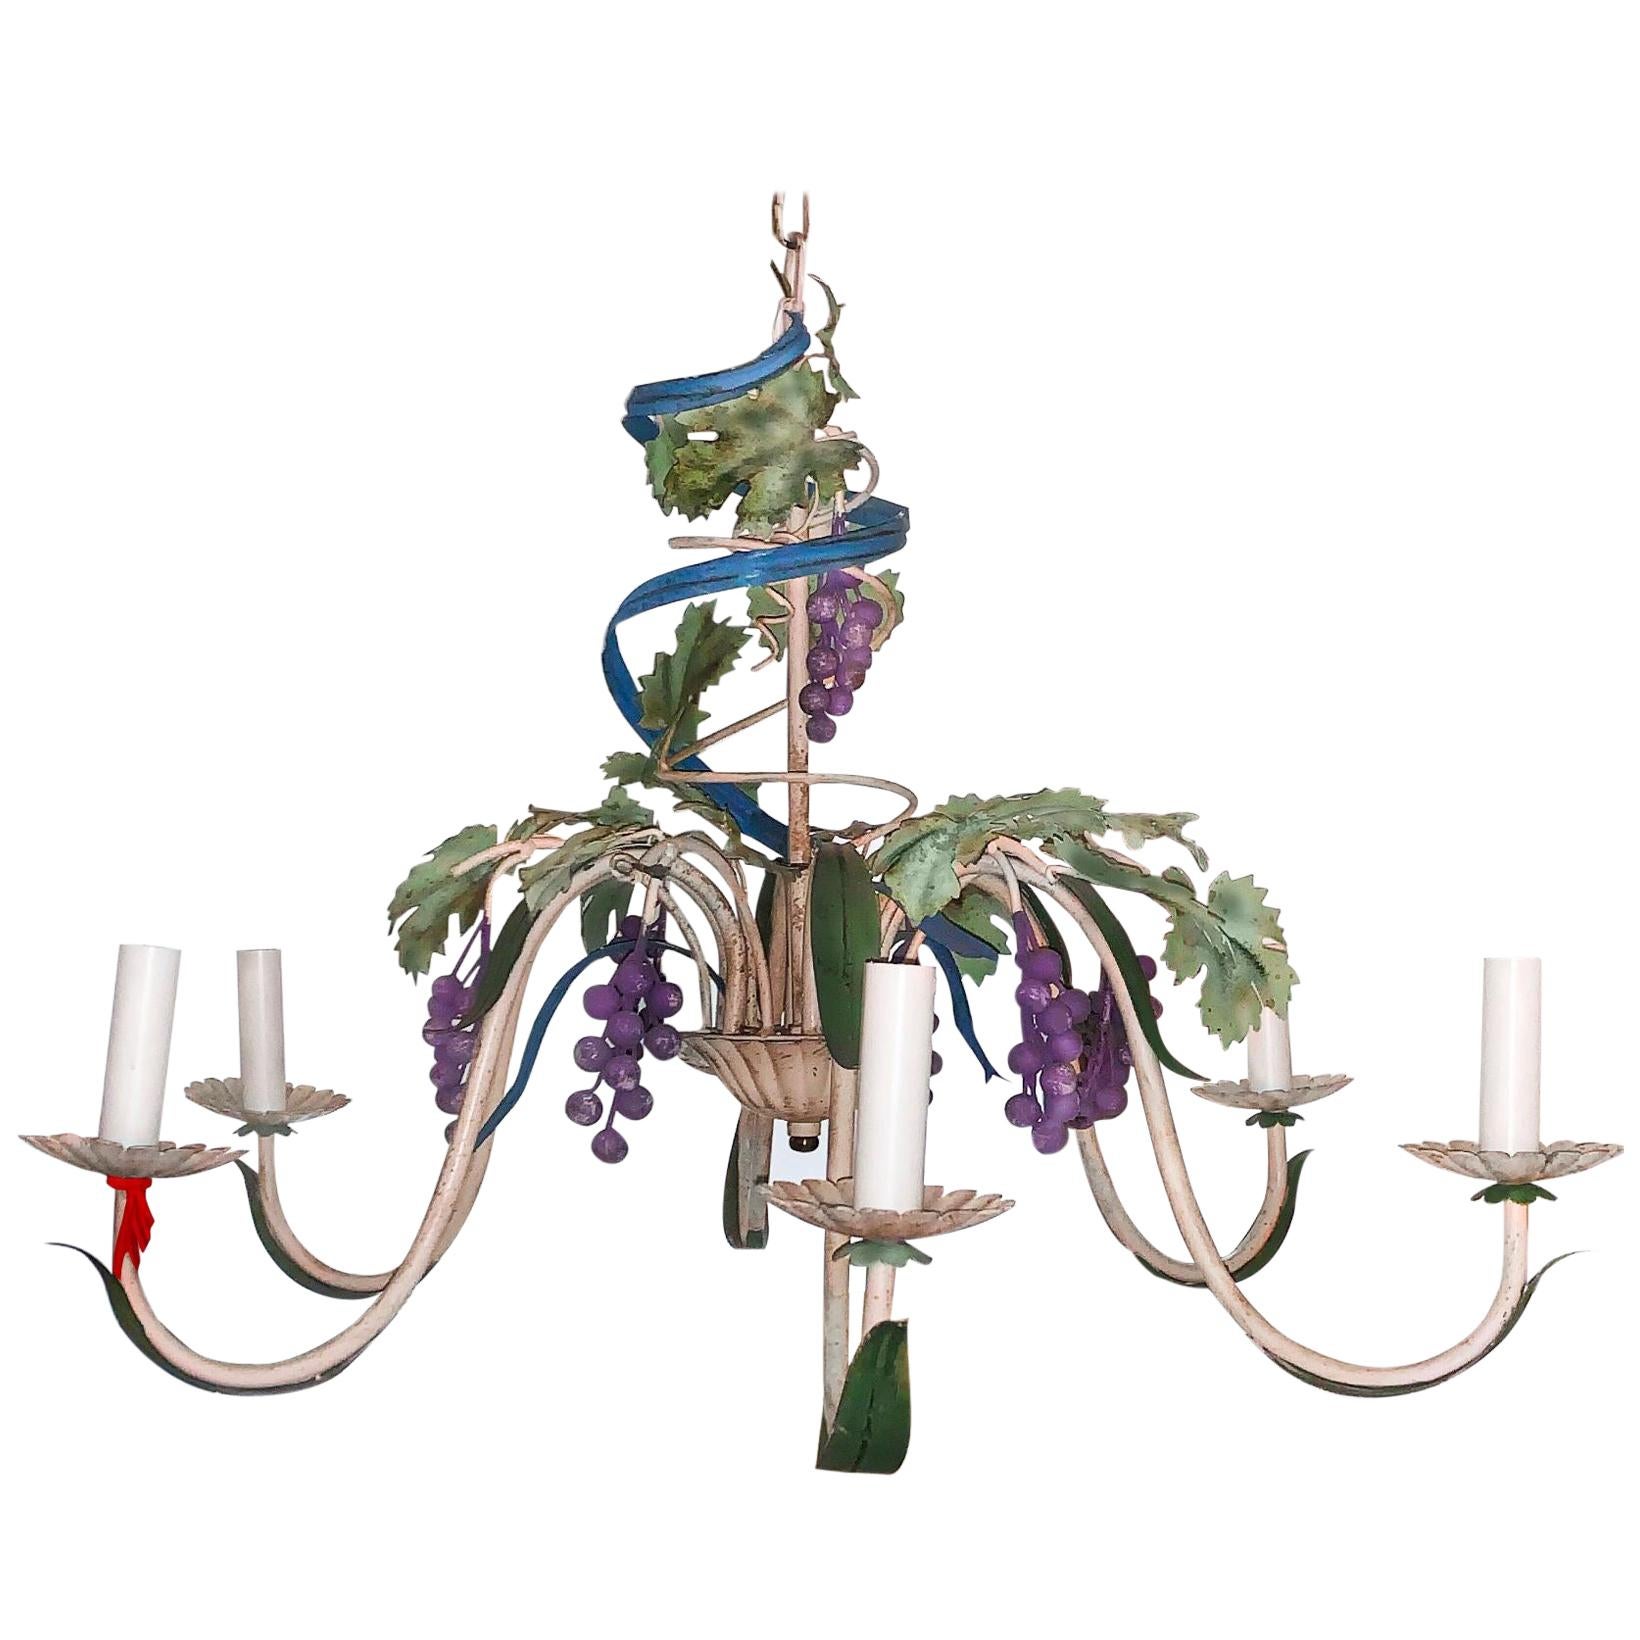 Midcentury Italianate Tuscan Toleware Grapevine Six-Arm Chandelier Polychromed